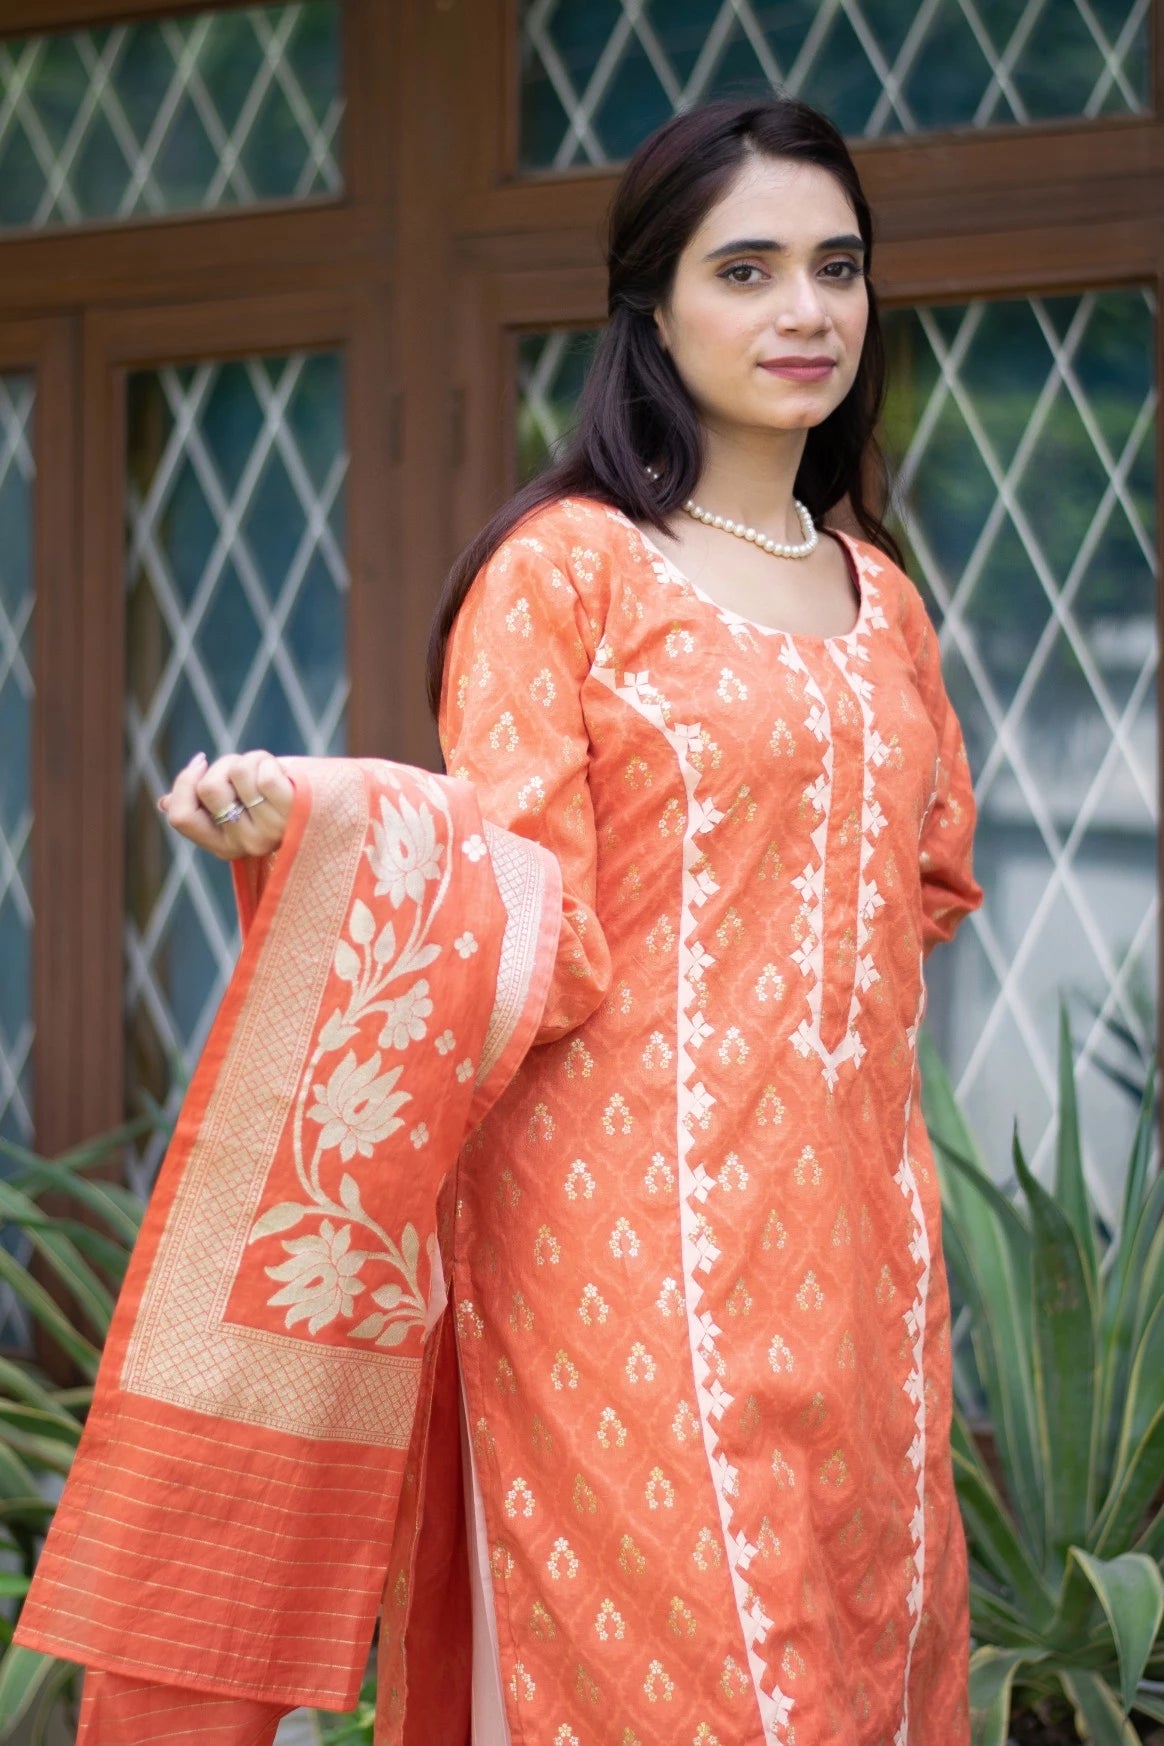 An ethnic outfit consisting of an orange silk kurta and pants